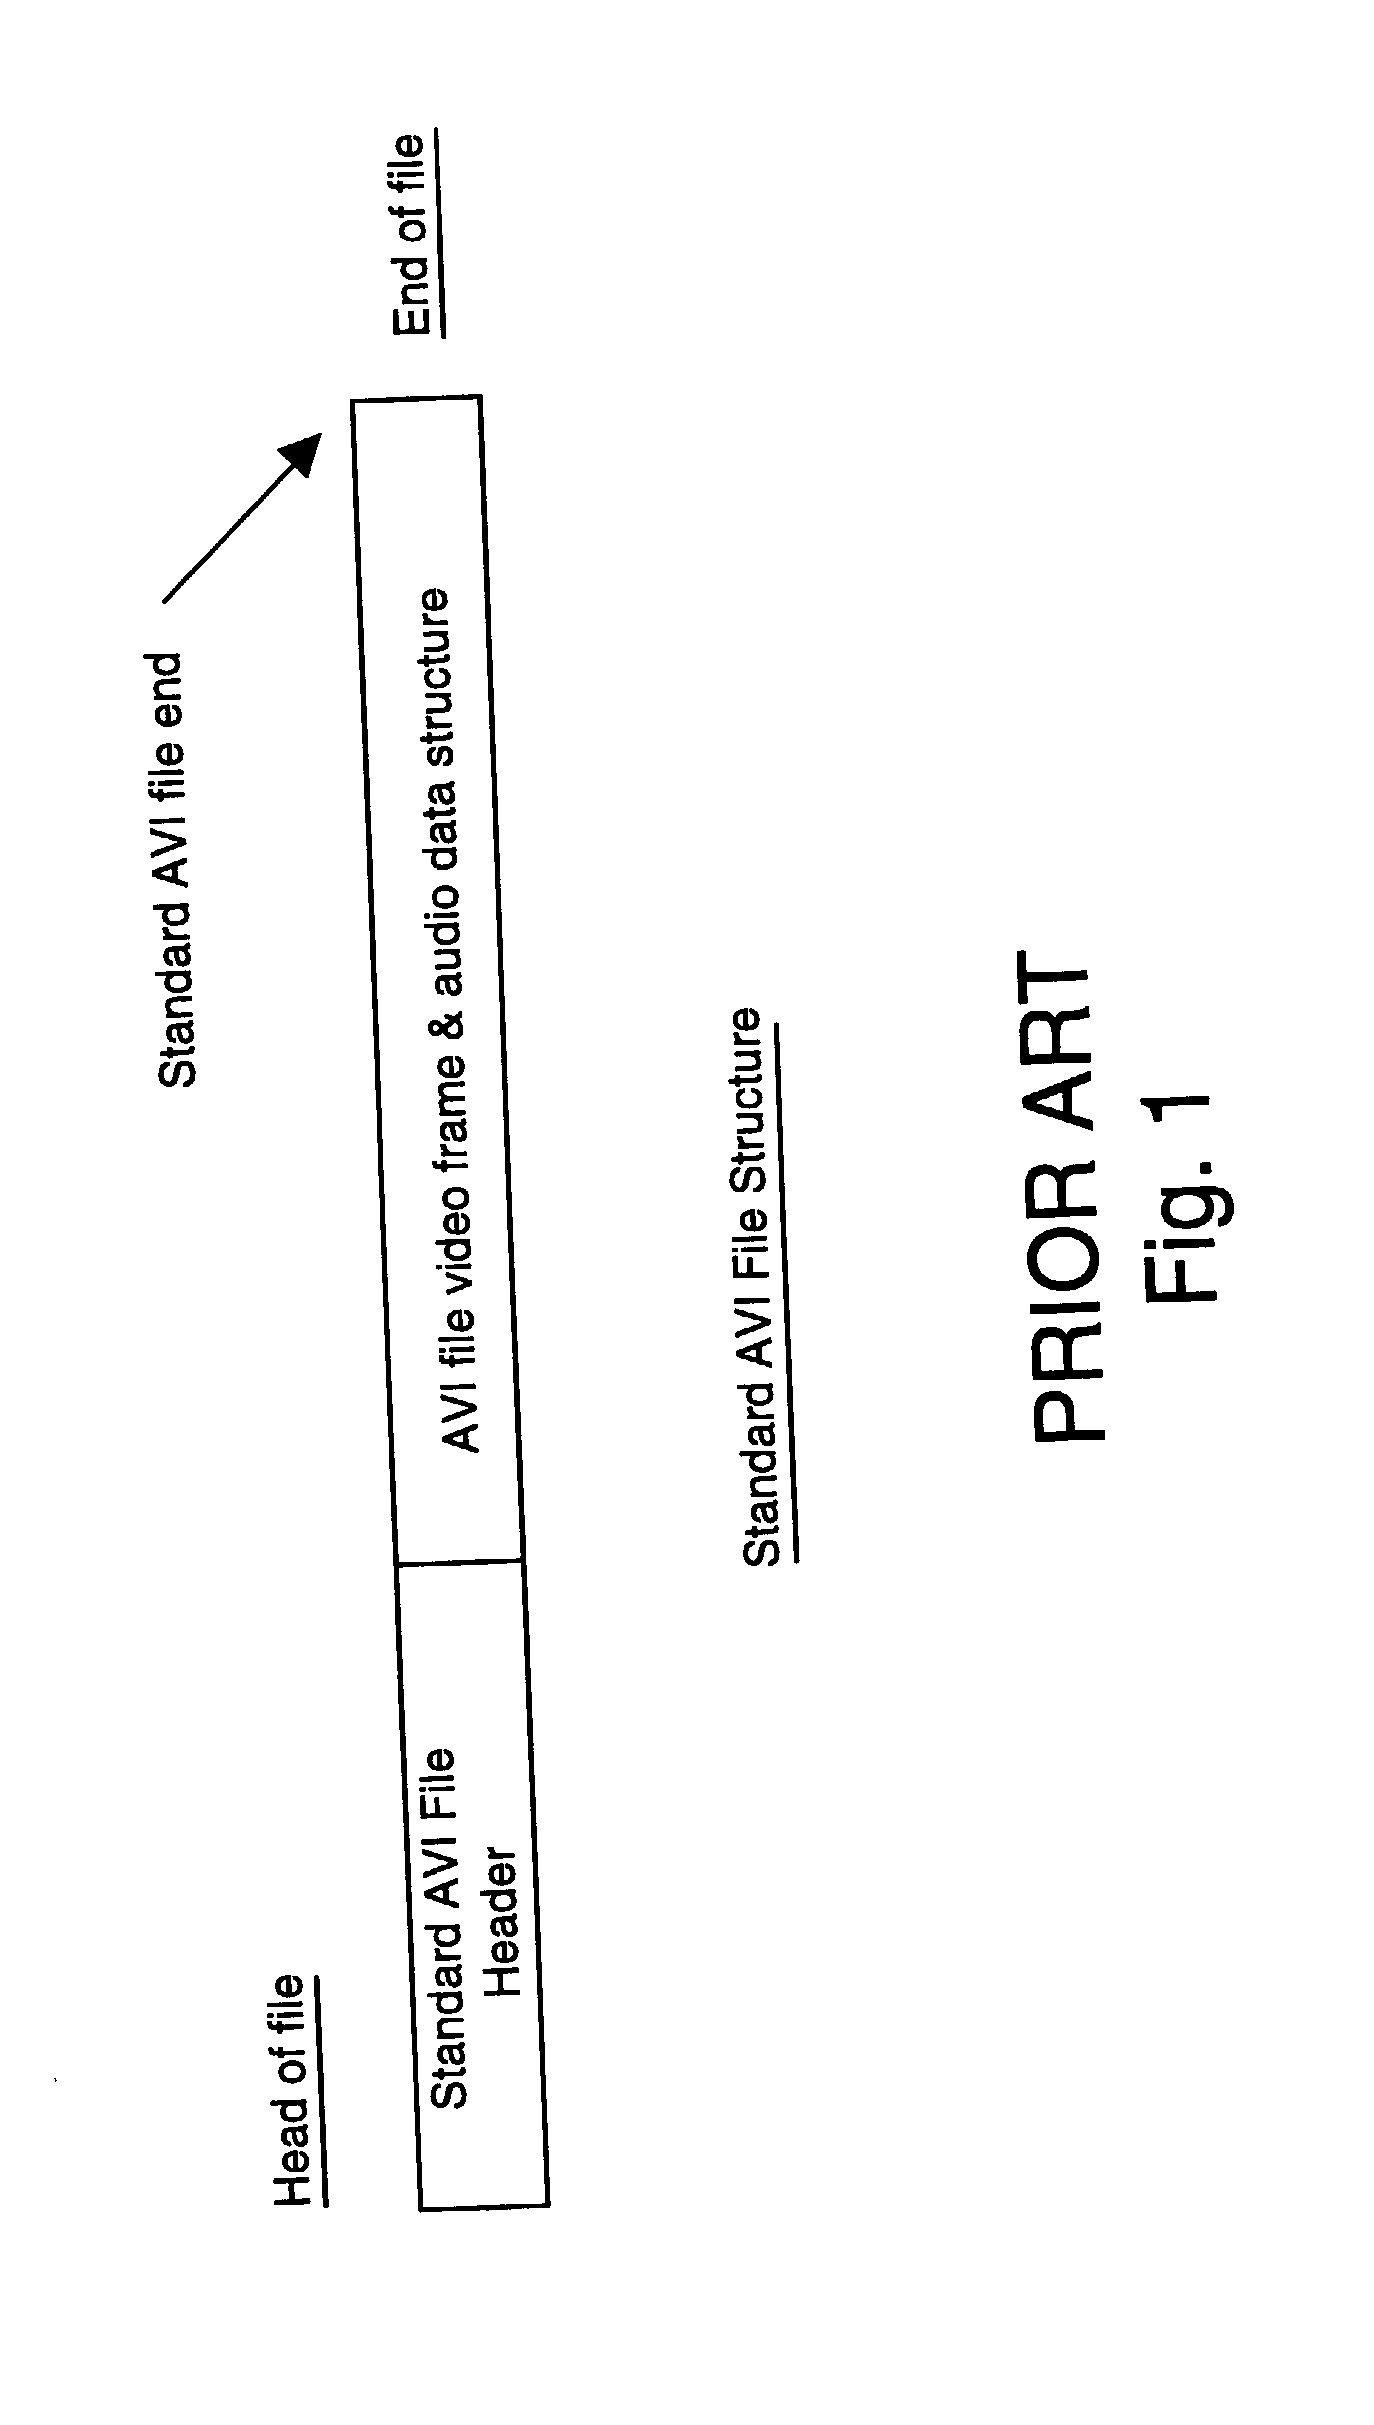 Video event capturing system and method